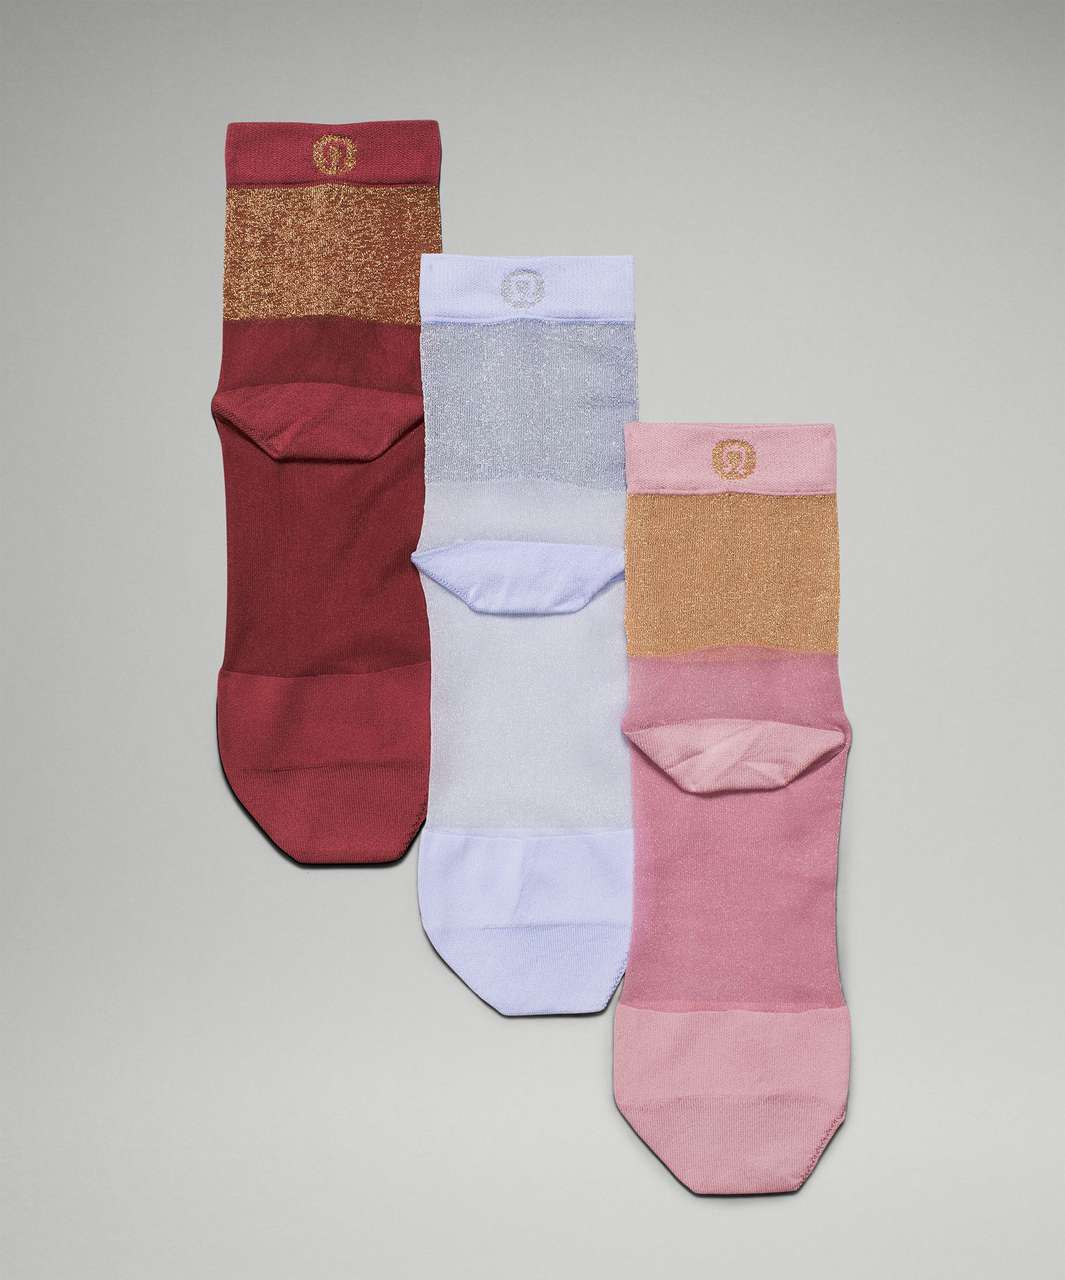 Lululemon Socks Factory South Africa - Delicate Mint / Pink Lychee /  Capture Blue Womens Daily Stride No Show Sock 3P